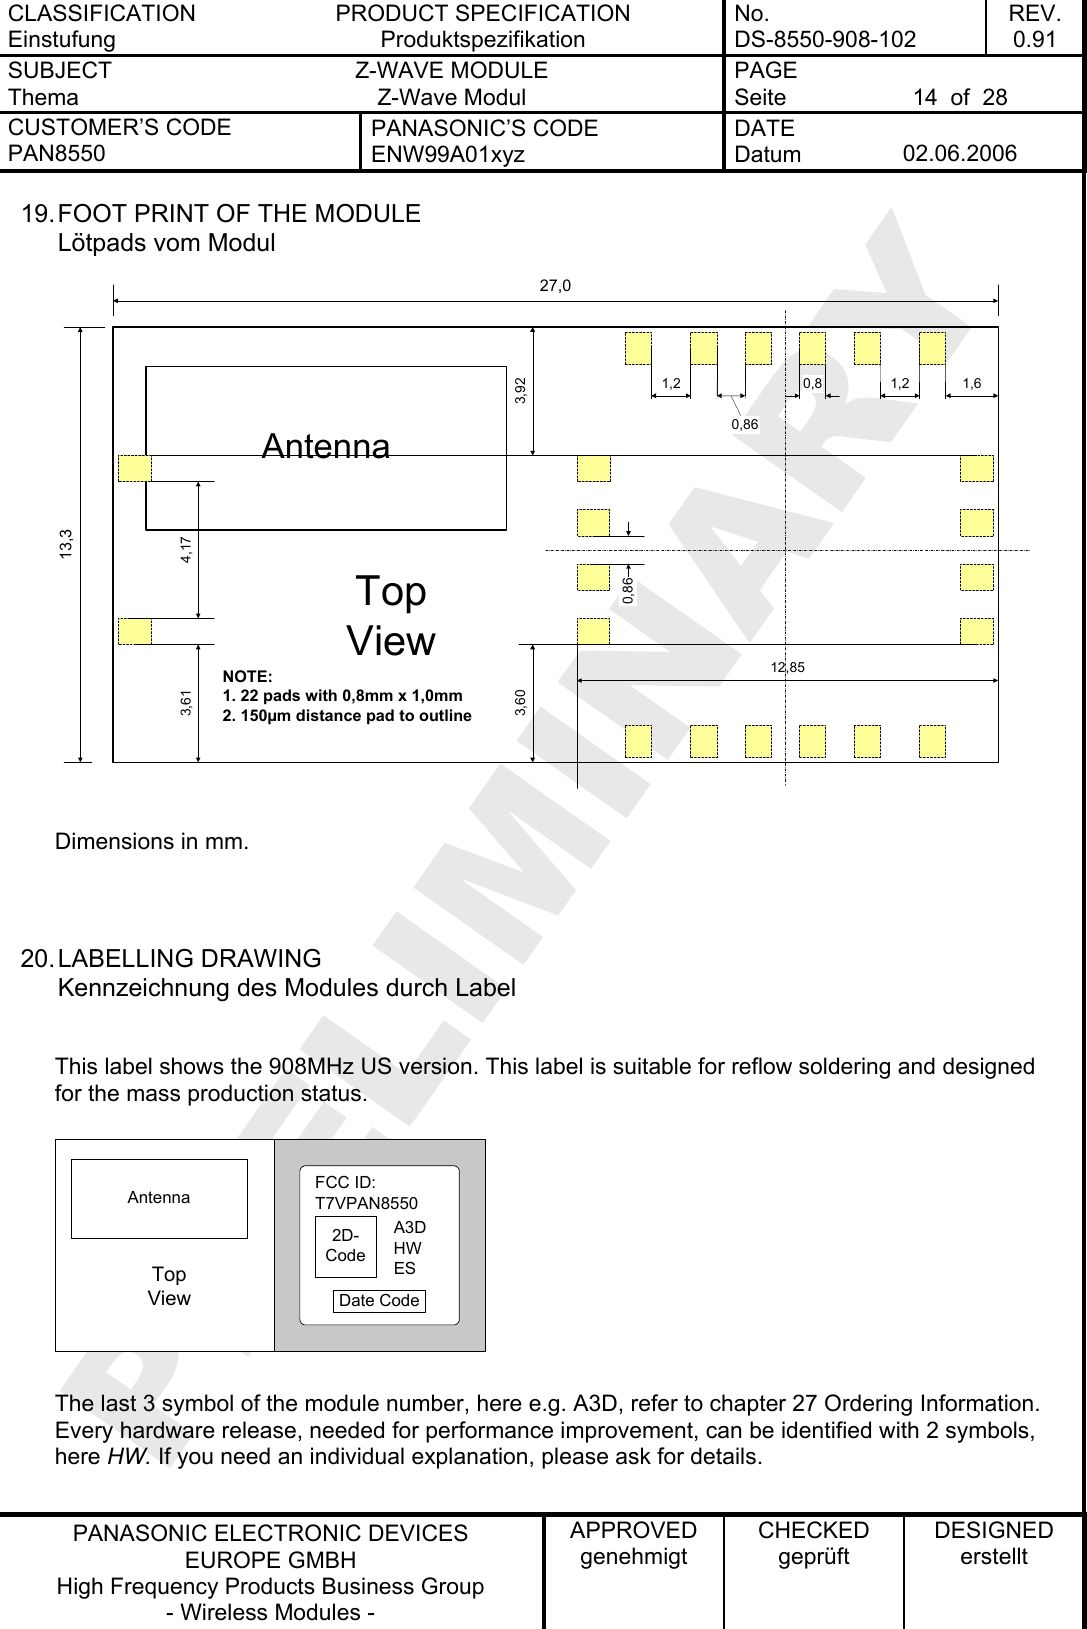 CLASSIFICATION Einstufung PRODUCT SPECIFICATION Produktspezifikation No. DS-8550-908-102 REV. 0.91 SUBJECT Thema Z-WAVE MODULE Z-Wave Modul PAGE Seite  14  of  28 CUSTOMER’S CODE PAN8550 PANASONIC’S CODE ENW99A01xyz DATE Datum  02.06.2006   PANASONIC ELECTRONIC DEVICES EUROPE GMBH High Frequency Products Business Group - Wireless Modules - APPROVED genehmigt CHECKED geprüft DESIGNED erstellt 19. FOOT PRINT OF THE MODULE Lötpads vom Modul Antenna13,327,04,170,80,861,212,853,601,63,921,2NOTE:1. 22 pads with 0,8mm x 1,0mm2. 150µm distance pad to outlineTopView3,610,86 Dimensions in mm.   20. LABELLING  DRAWING Kennzeichnung des Modules durch Label  This label shows the 908MHz US version. This label is suitable for reflow soldering and designed for the mass production status. 2D-CodeFCC ID:T7VPAN8550Date CodeA3DAntennaHWTopViewES The last 3 symbol of the module number, here e.g. A3D, refer to chapter 27 Ordering Information. Every hardware release, needed for performance improvement, can be identified with 2 symbols, here HW. If you need an individual explanation, please ask for details.  